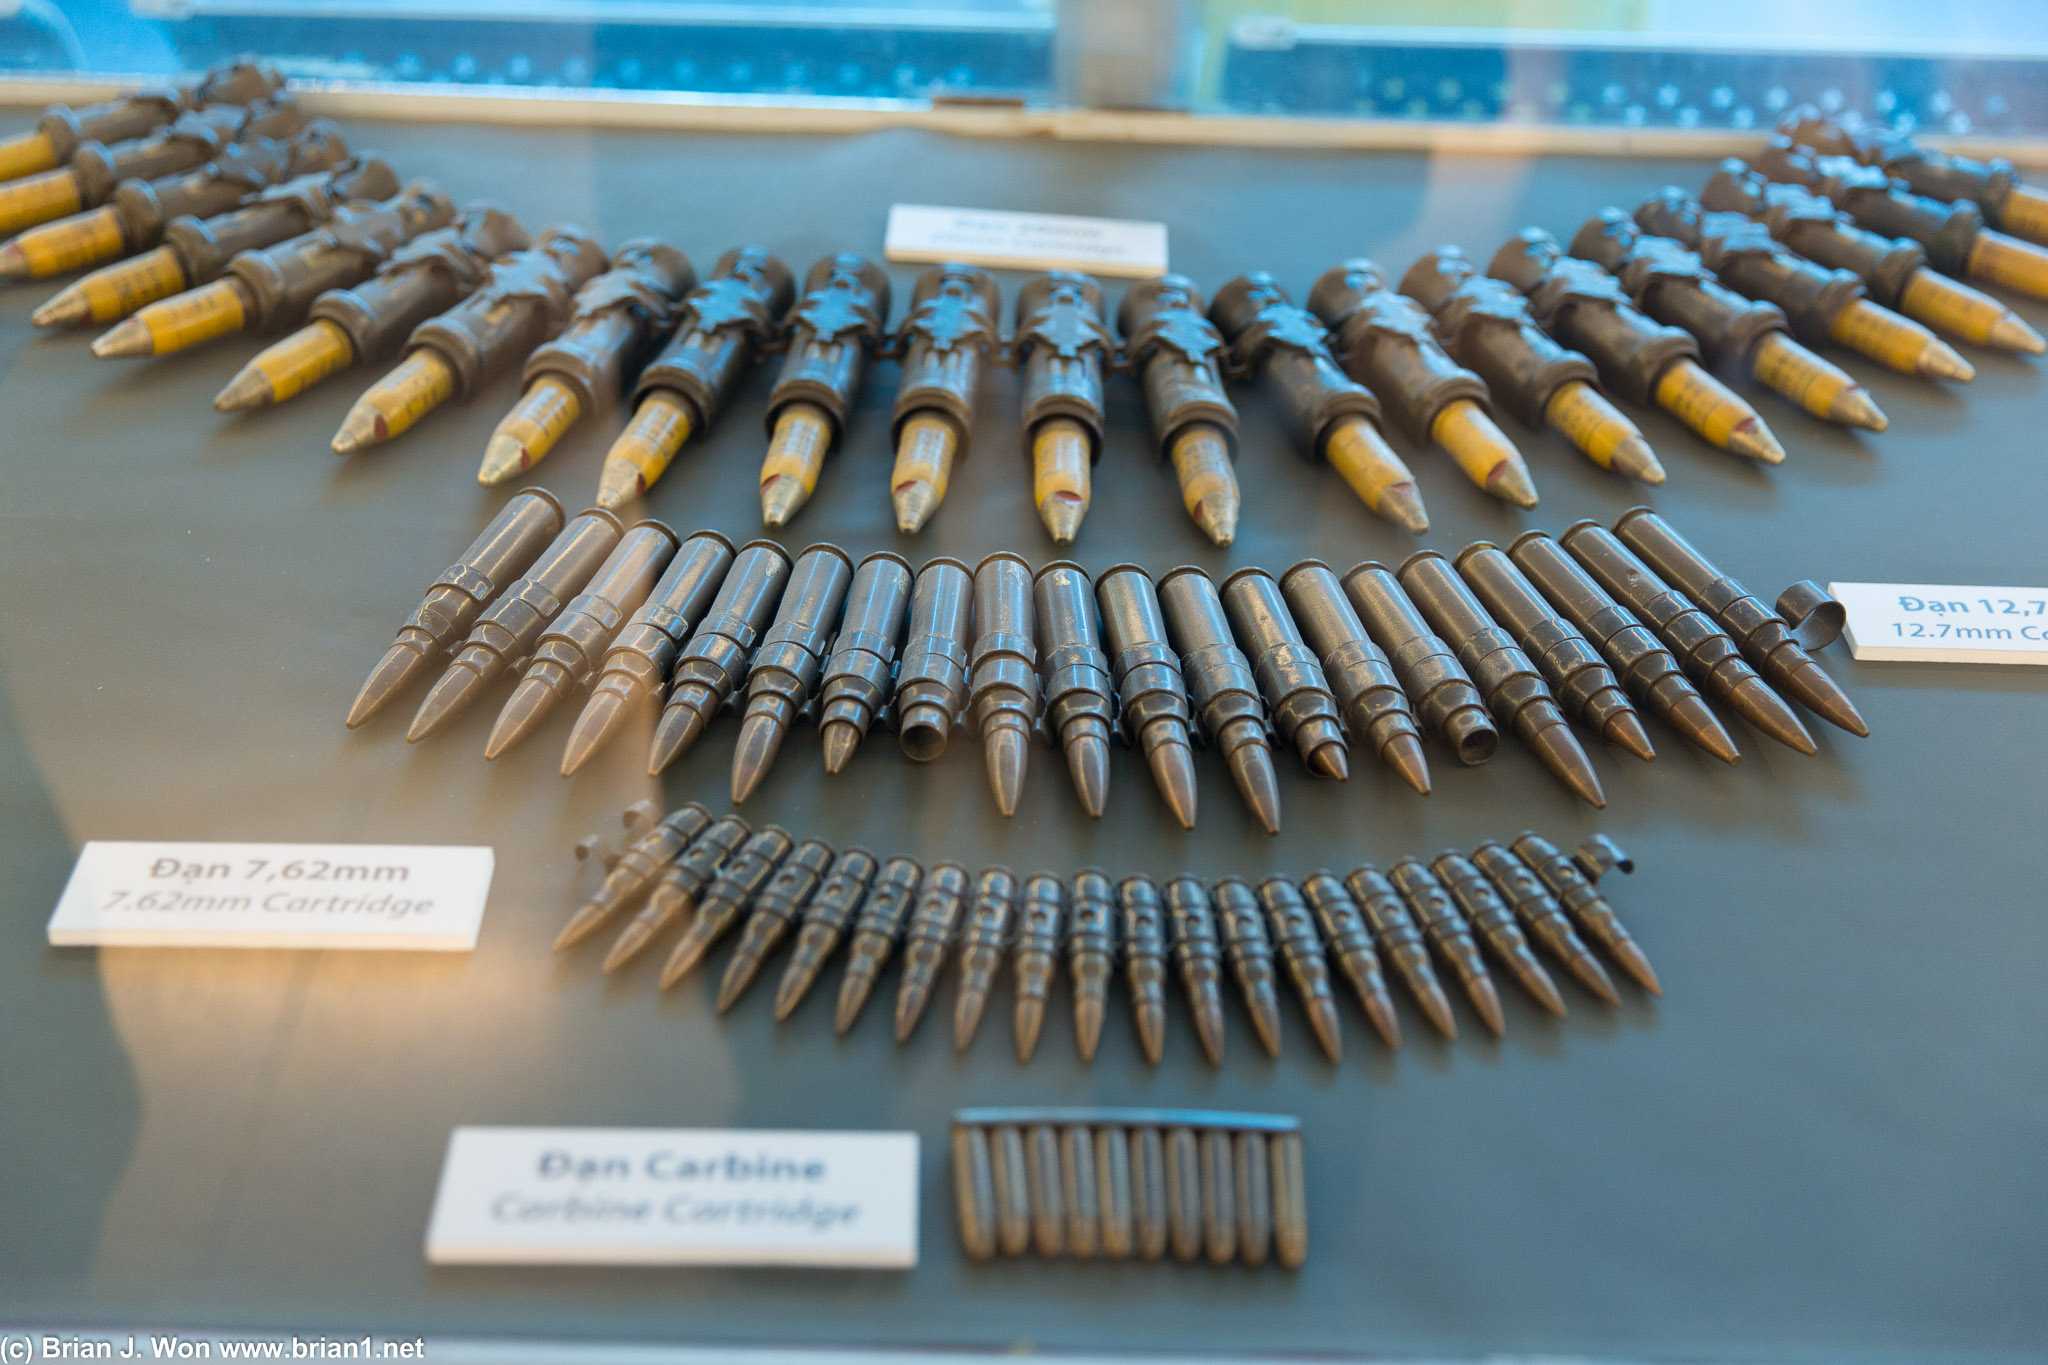 Ammunition. From .30 caliber, 7.62mm, 12.7mm, up to 20mm?